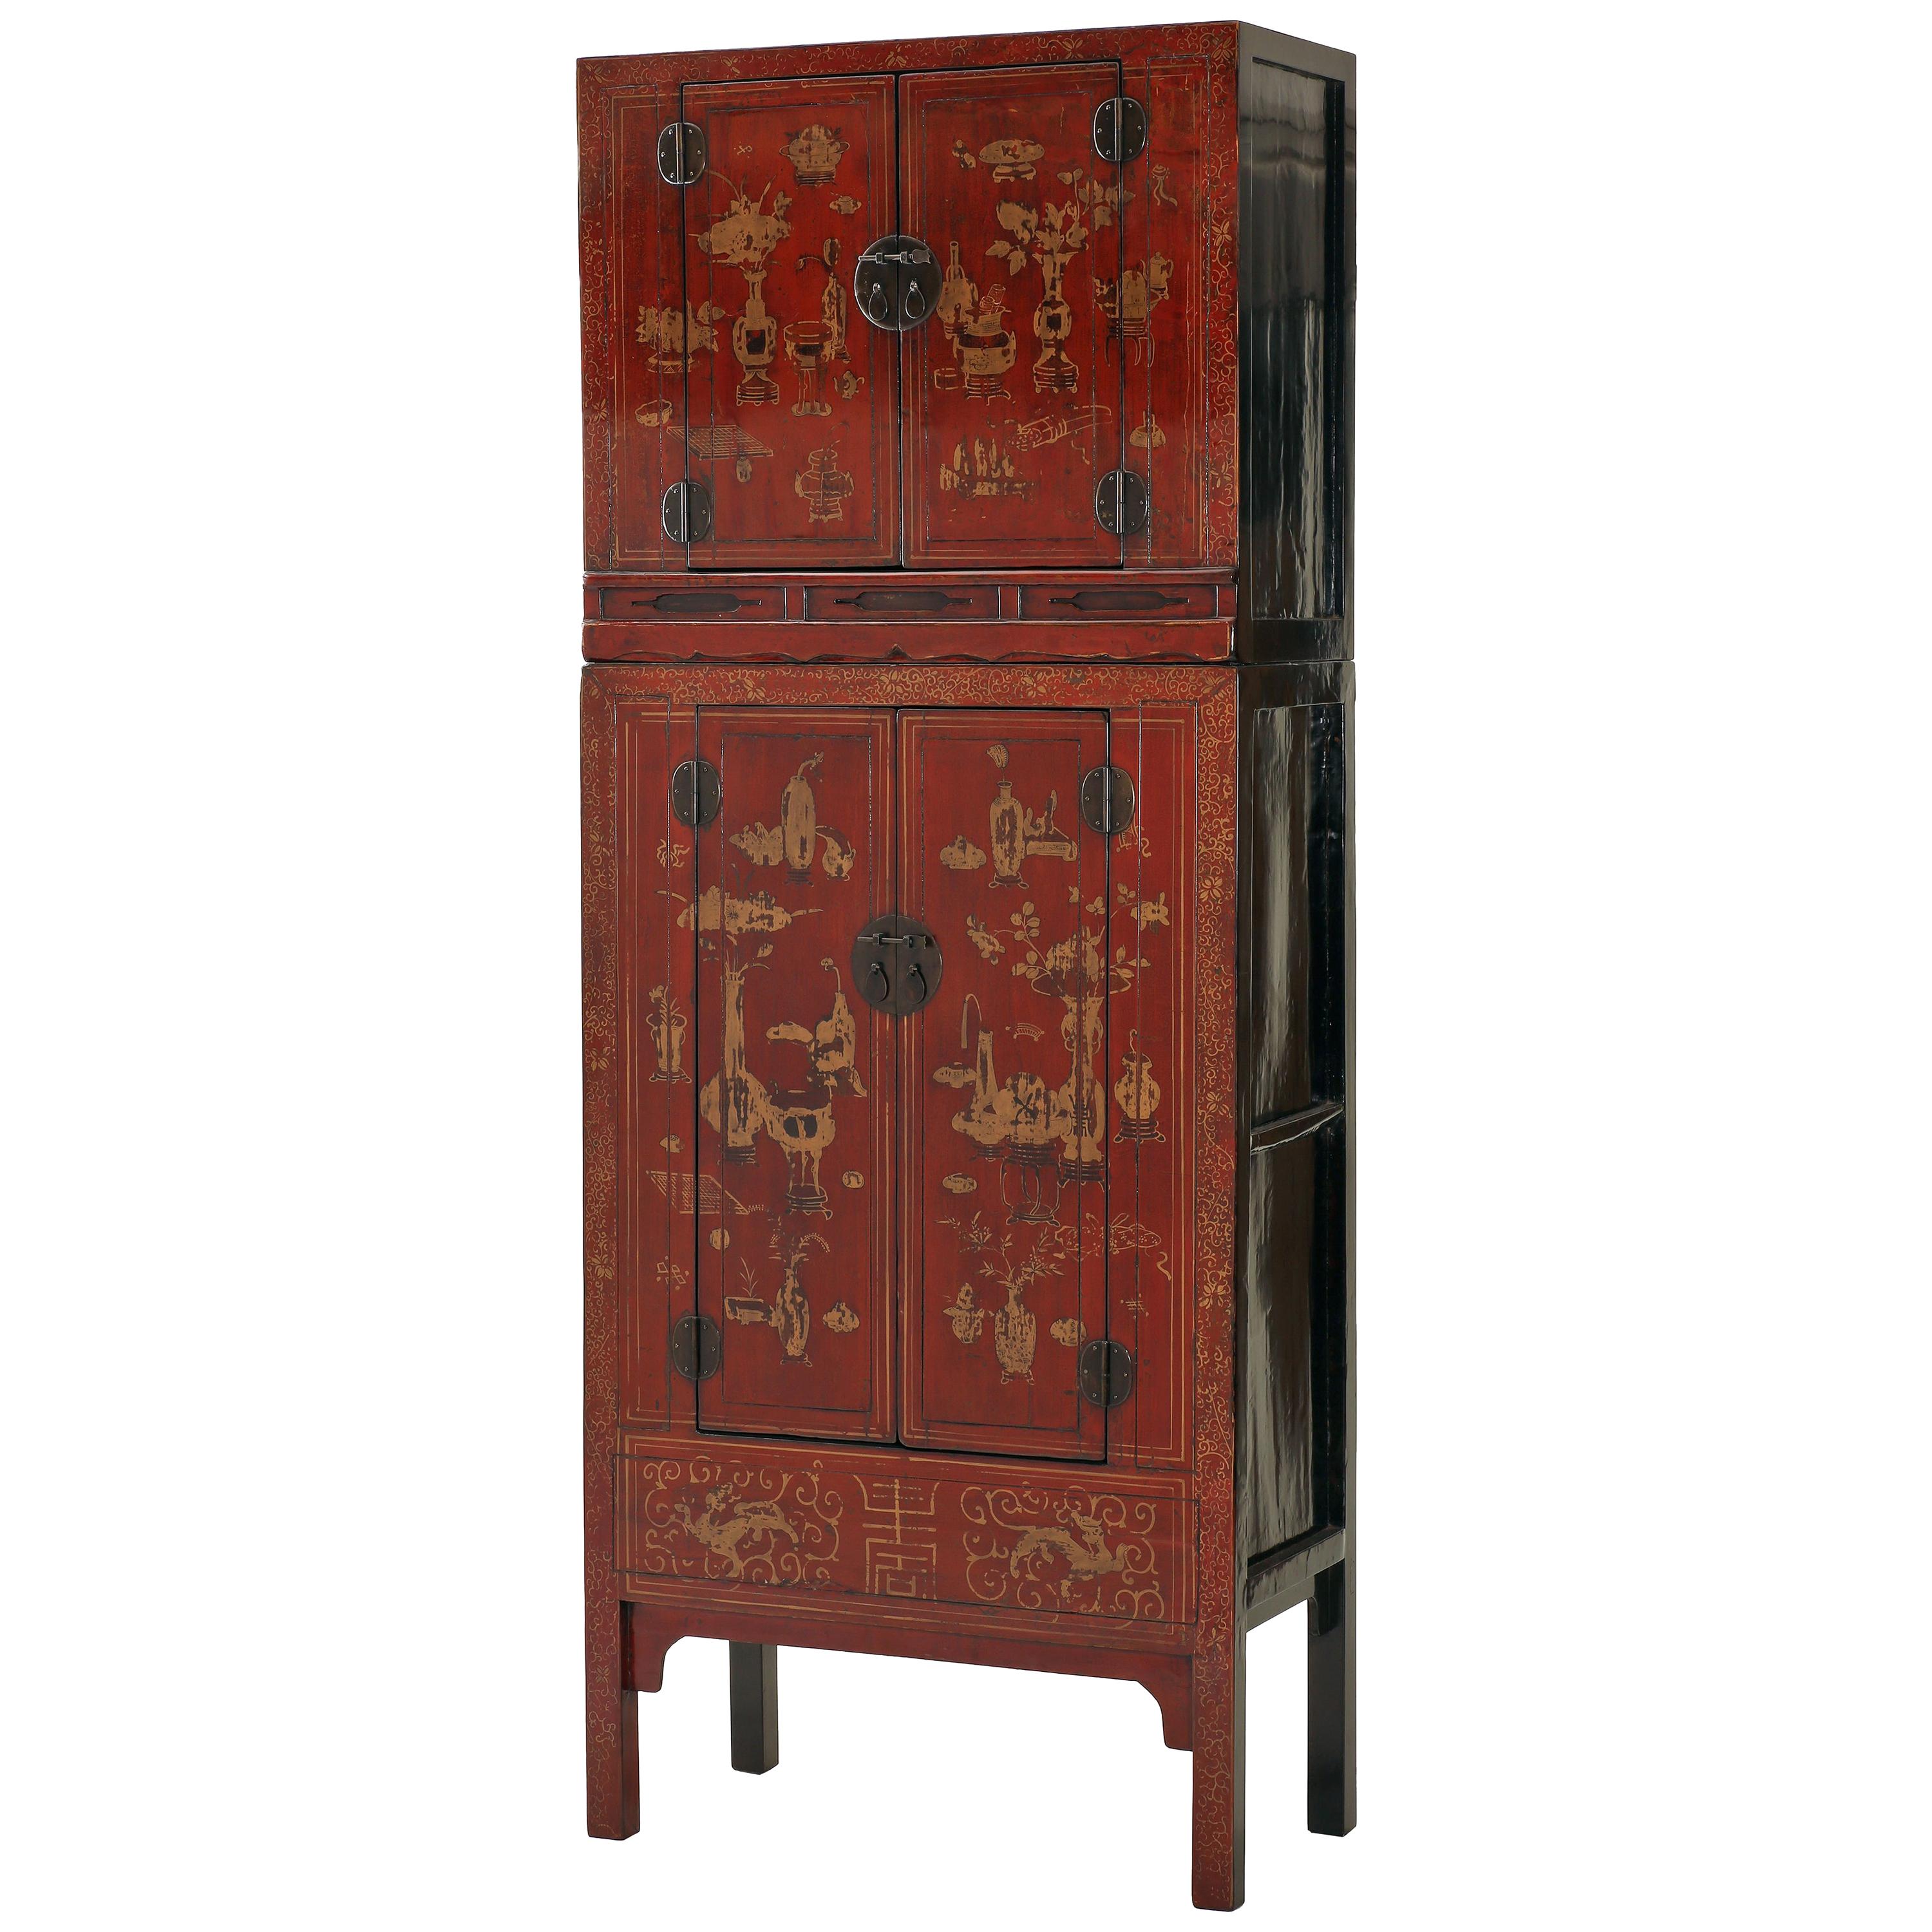 Antique Red Lacquer Gilt Painted Chinese Compound Cabinet, Scholastic Art